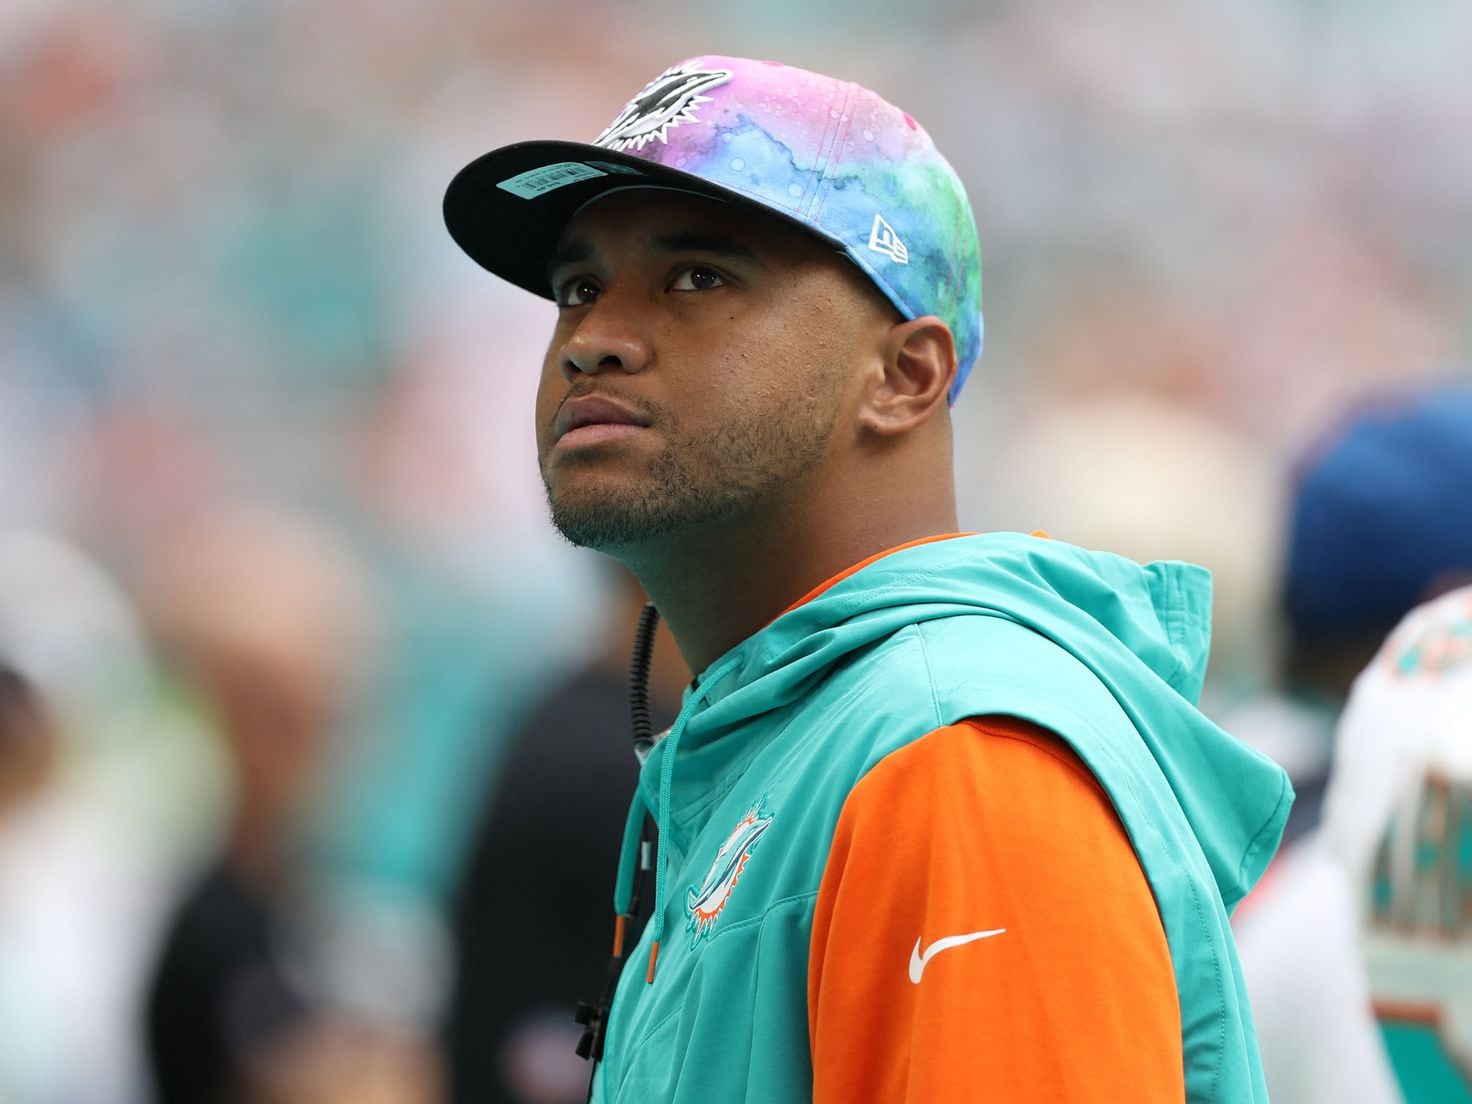 Tua Tagovailoa out of Dolphins' NFL Wild Card Game against Bills